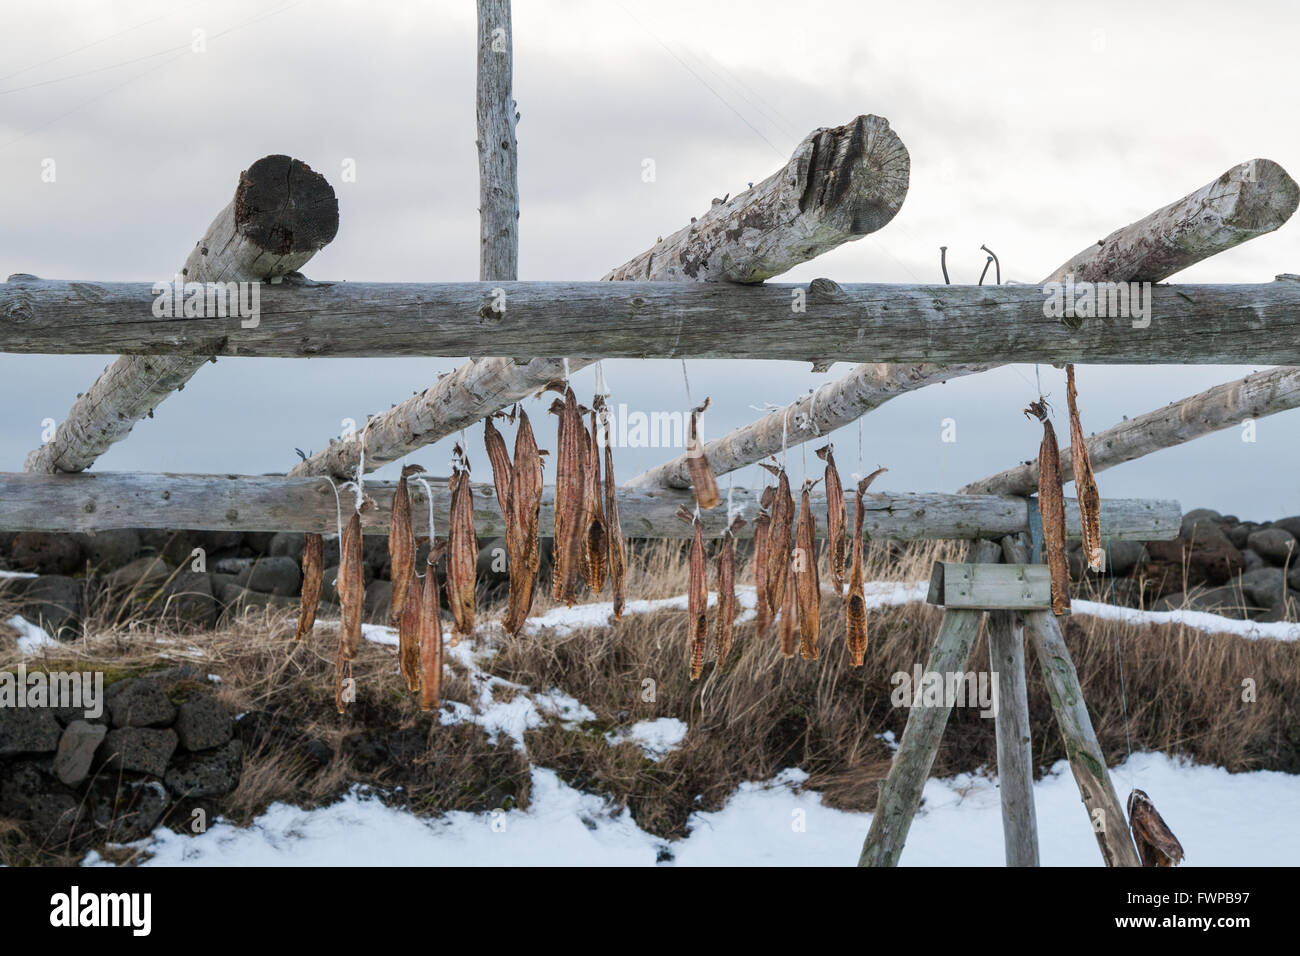 Fish hanging from drying racks at Eyrarbakki, southern Iceland surrounded by snow Stock Photo